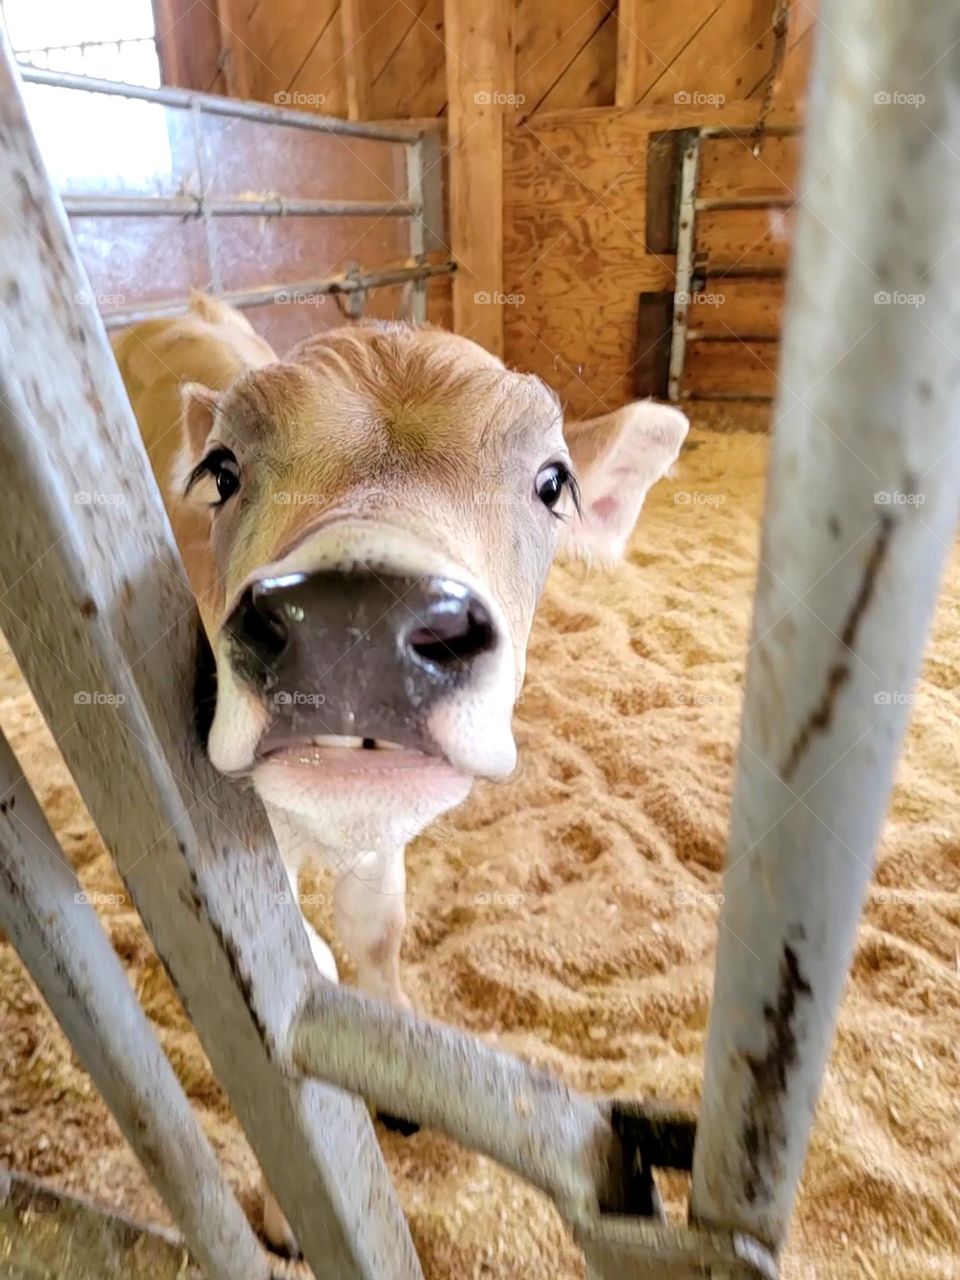 Adorable Calf with Little Teeth Showing